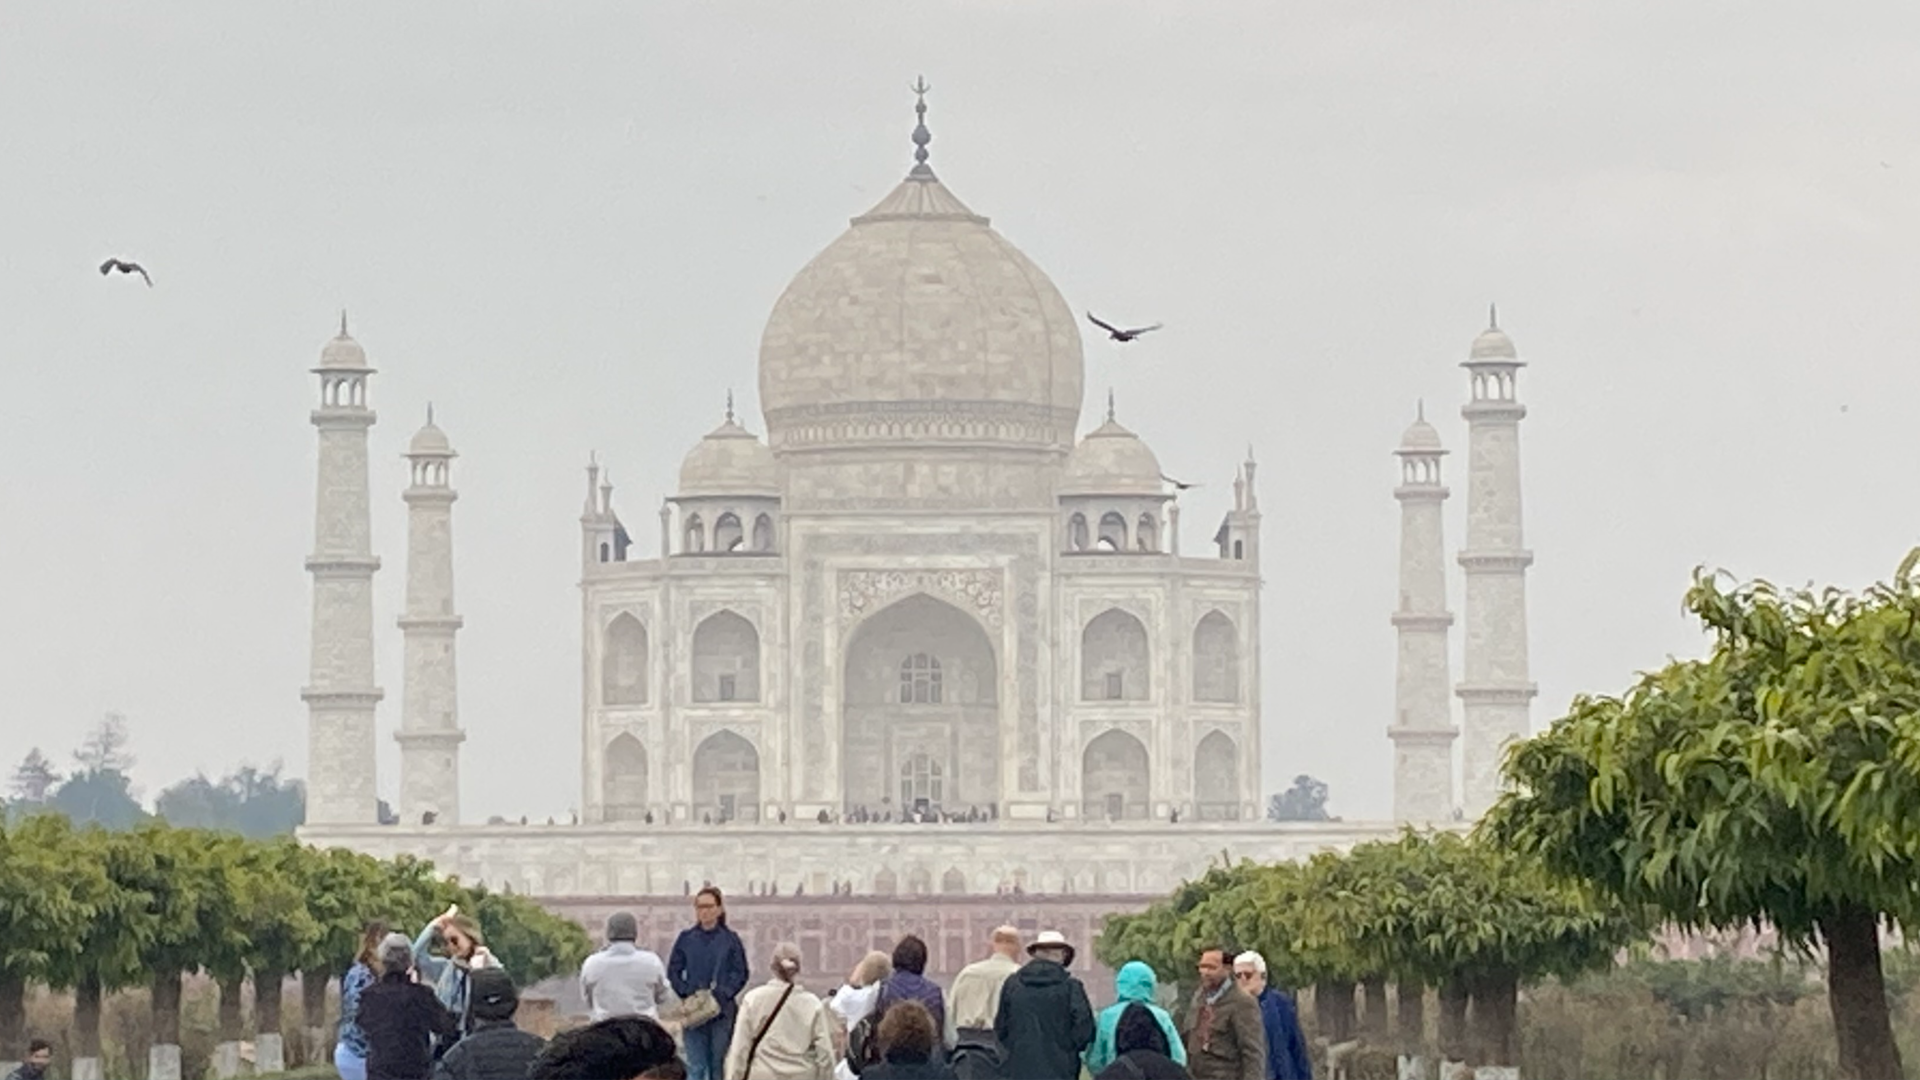 The Taj Mahal in the distance with people and trees closer to the camera.